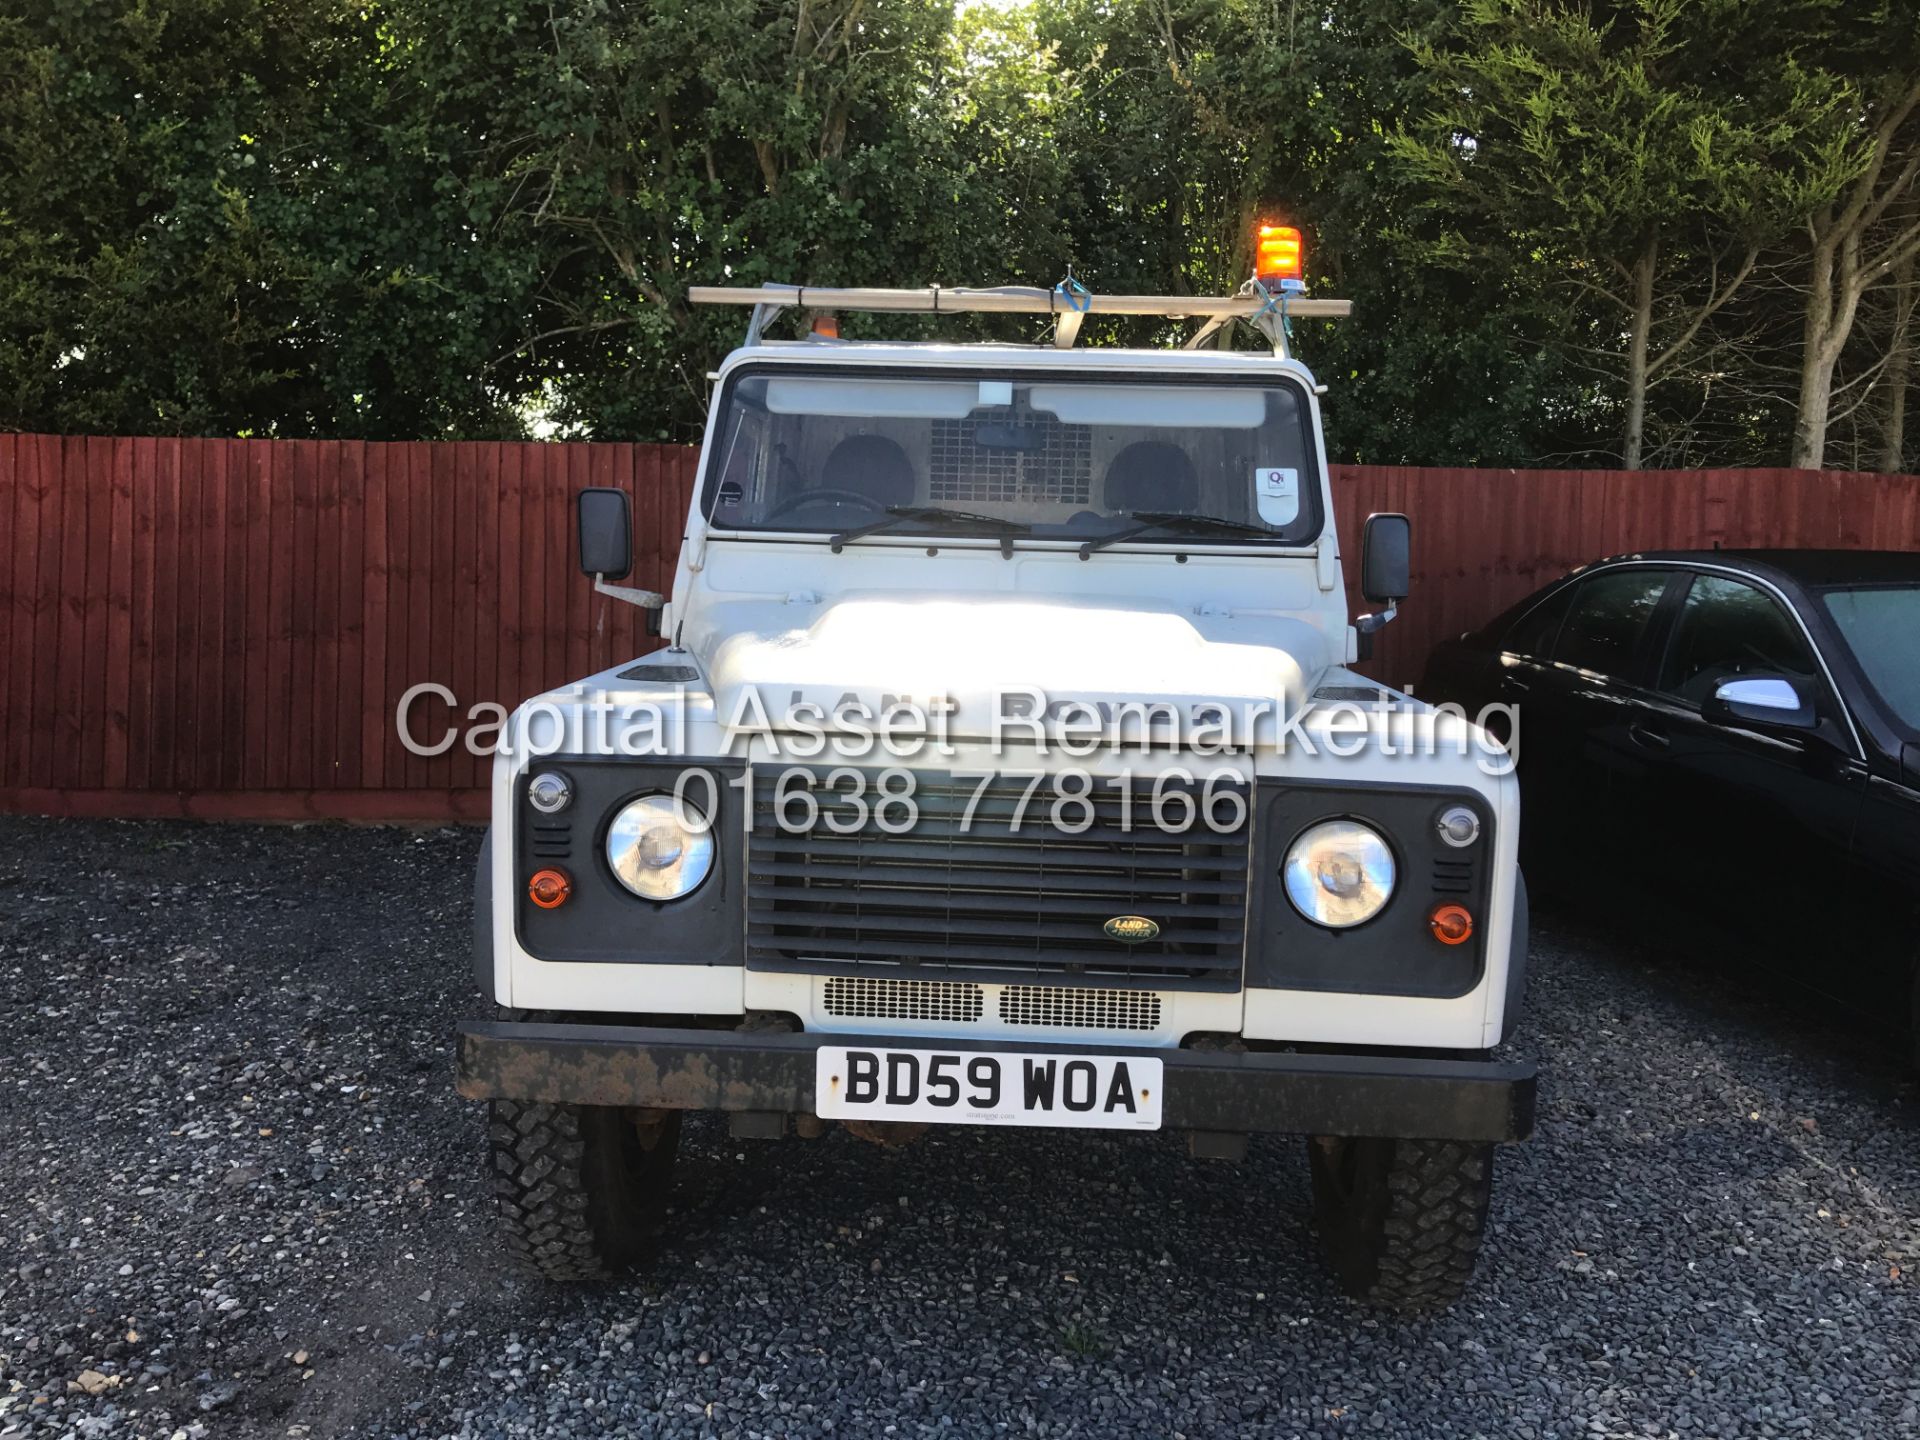 (ON SALE) LAND ROVER DEFENDER 2.4TDCI 110 HARD TOP (SPECIAL UTILITY VEHICLE) 6 SPEED (2010) 1 OWNER - Image 2 of 9